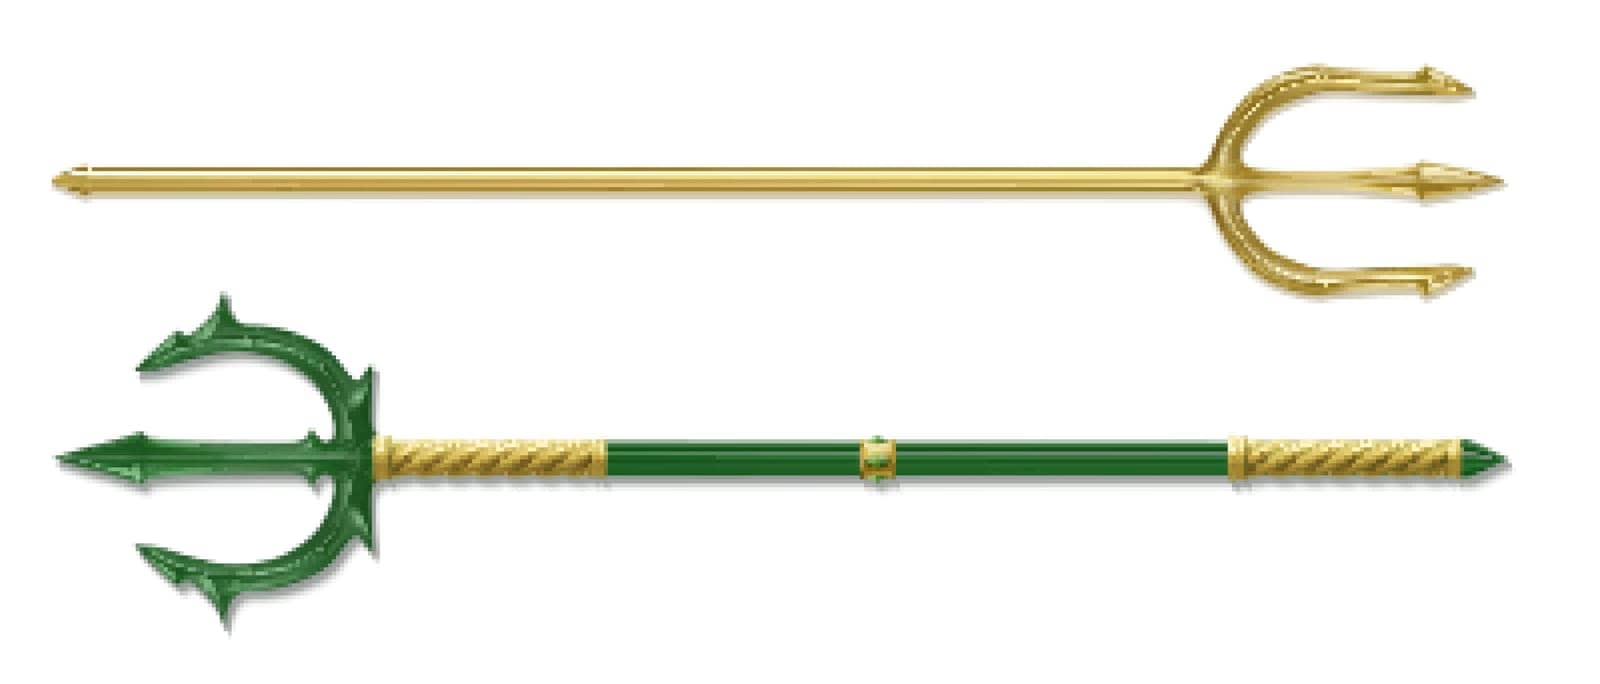 Poseidon tridents, marine God Neptune weapon, gold and green colored sharp pitchforks decorated with ornamental forgery and gems. Isolated forks on white background. Realistic 3d vector illustration